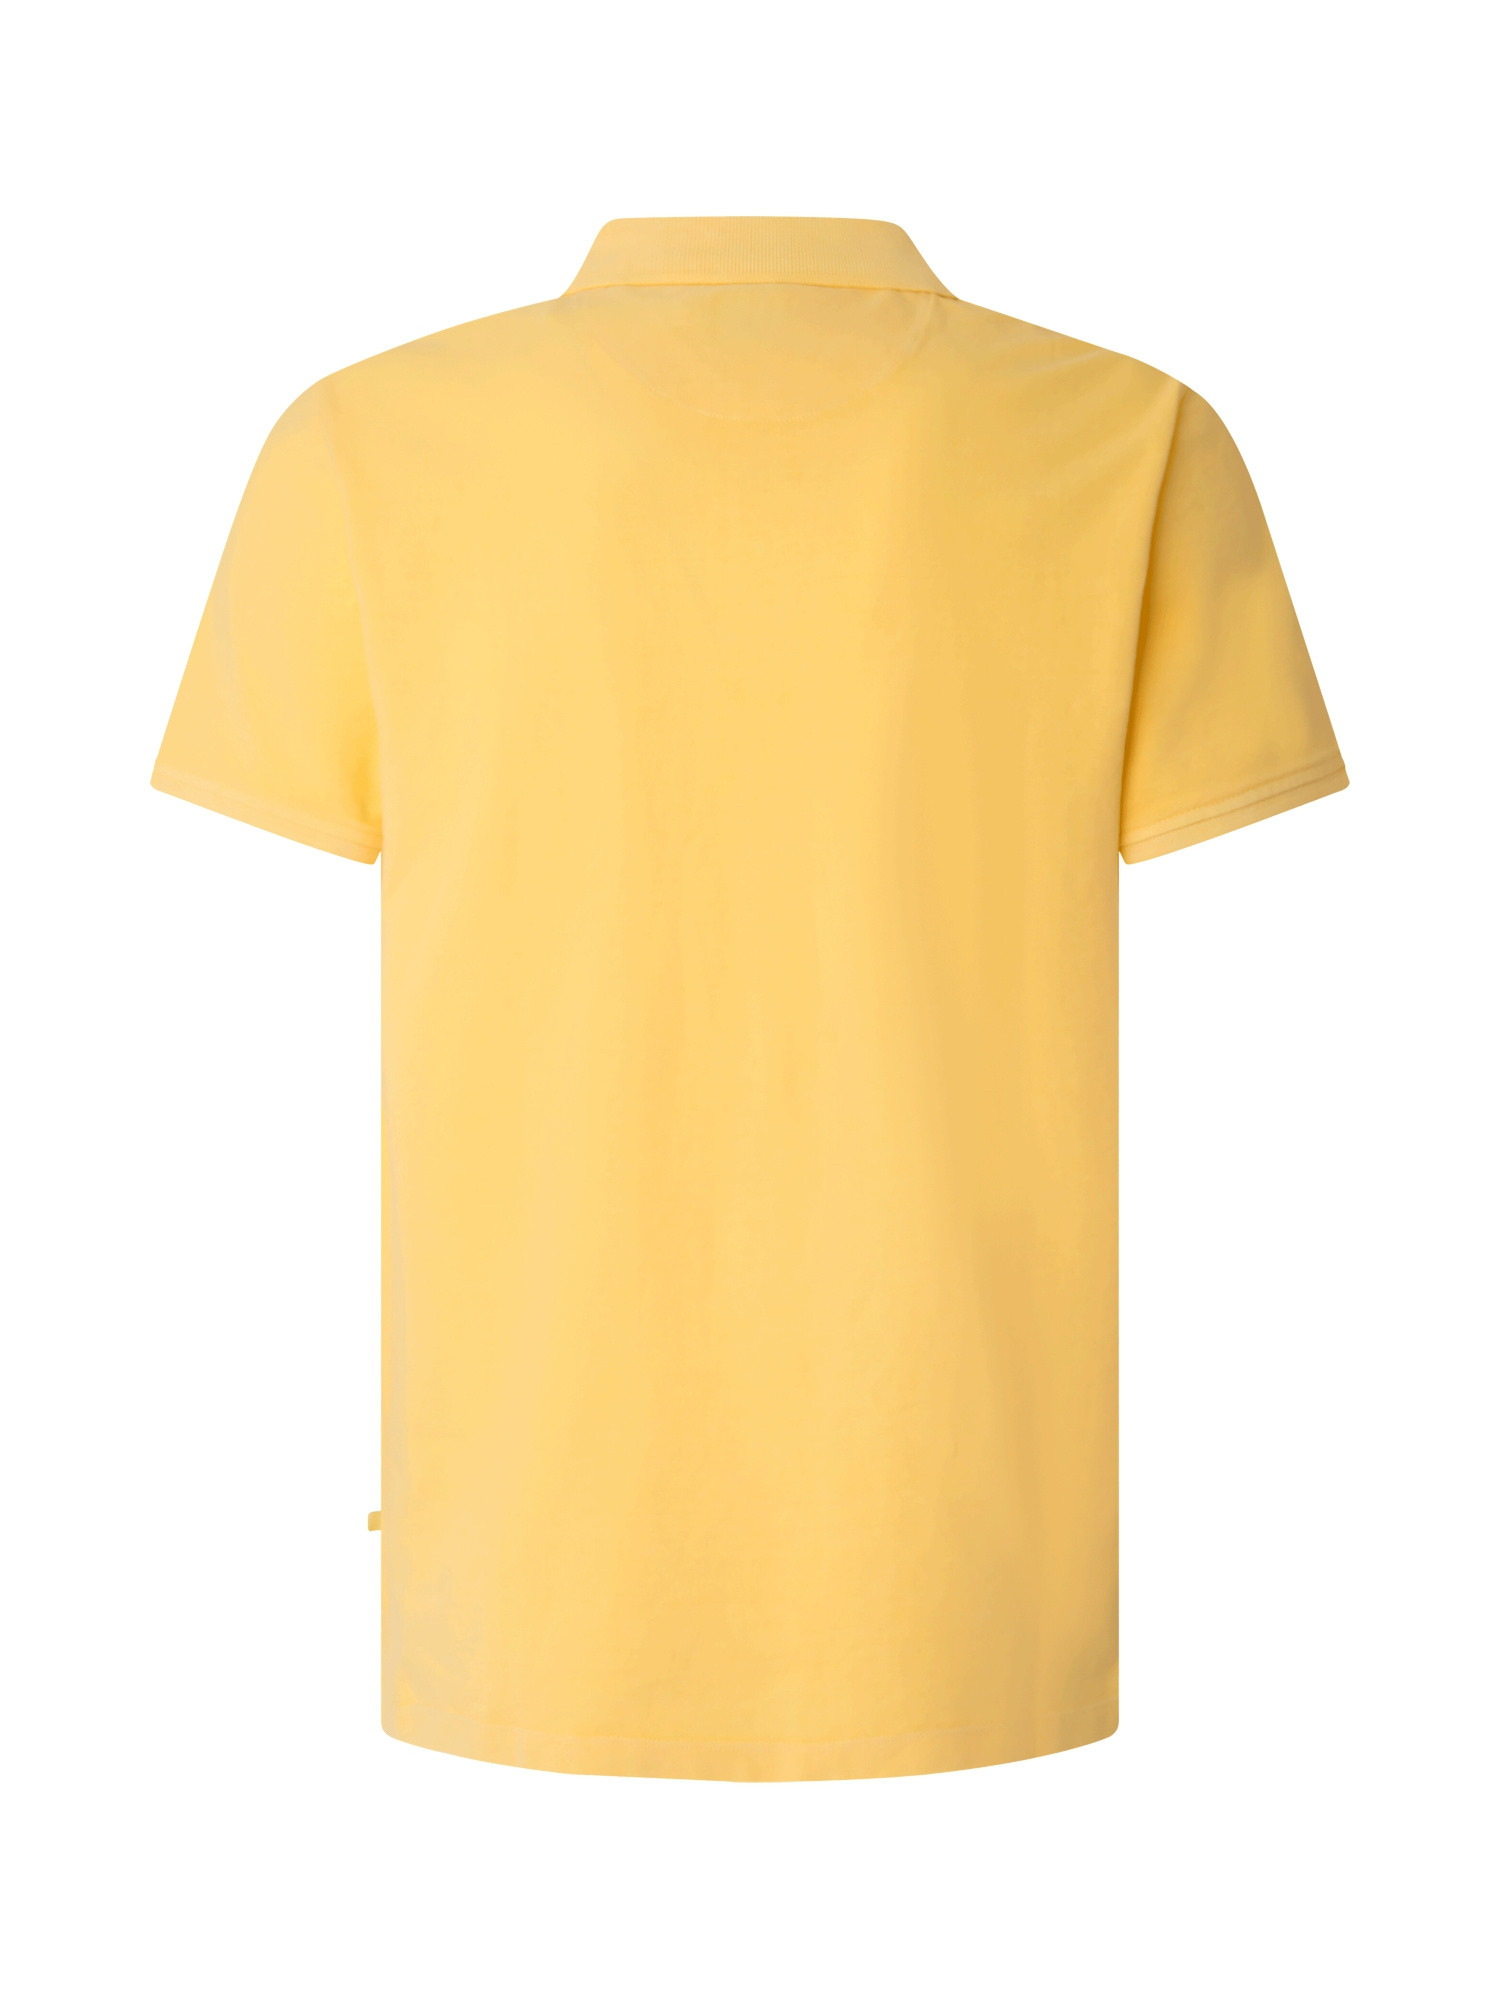 Pepe Jeans - Polo con logo in cotone, Giallo girasole, large image number 1